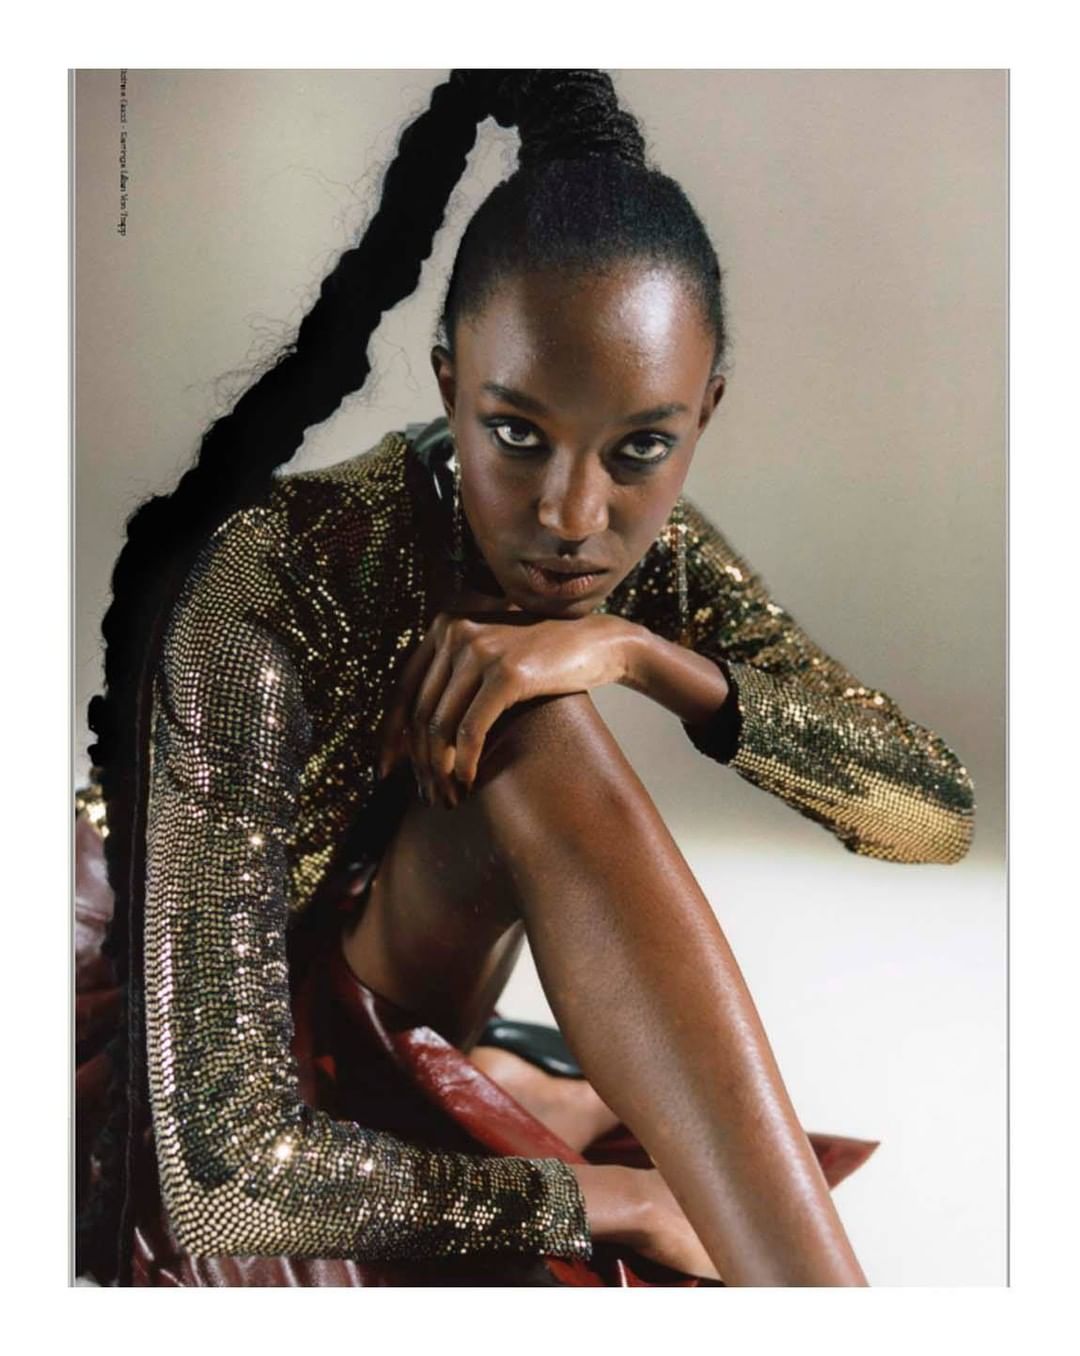 Gucci Official - Featured in the latest issue of @cactusdigital, @nicoleatieno wears a metallic long sleeve dress from #GucciSS20 by @alessandro_michele. She is photographed by @ahmedchrediy and style...